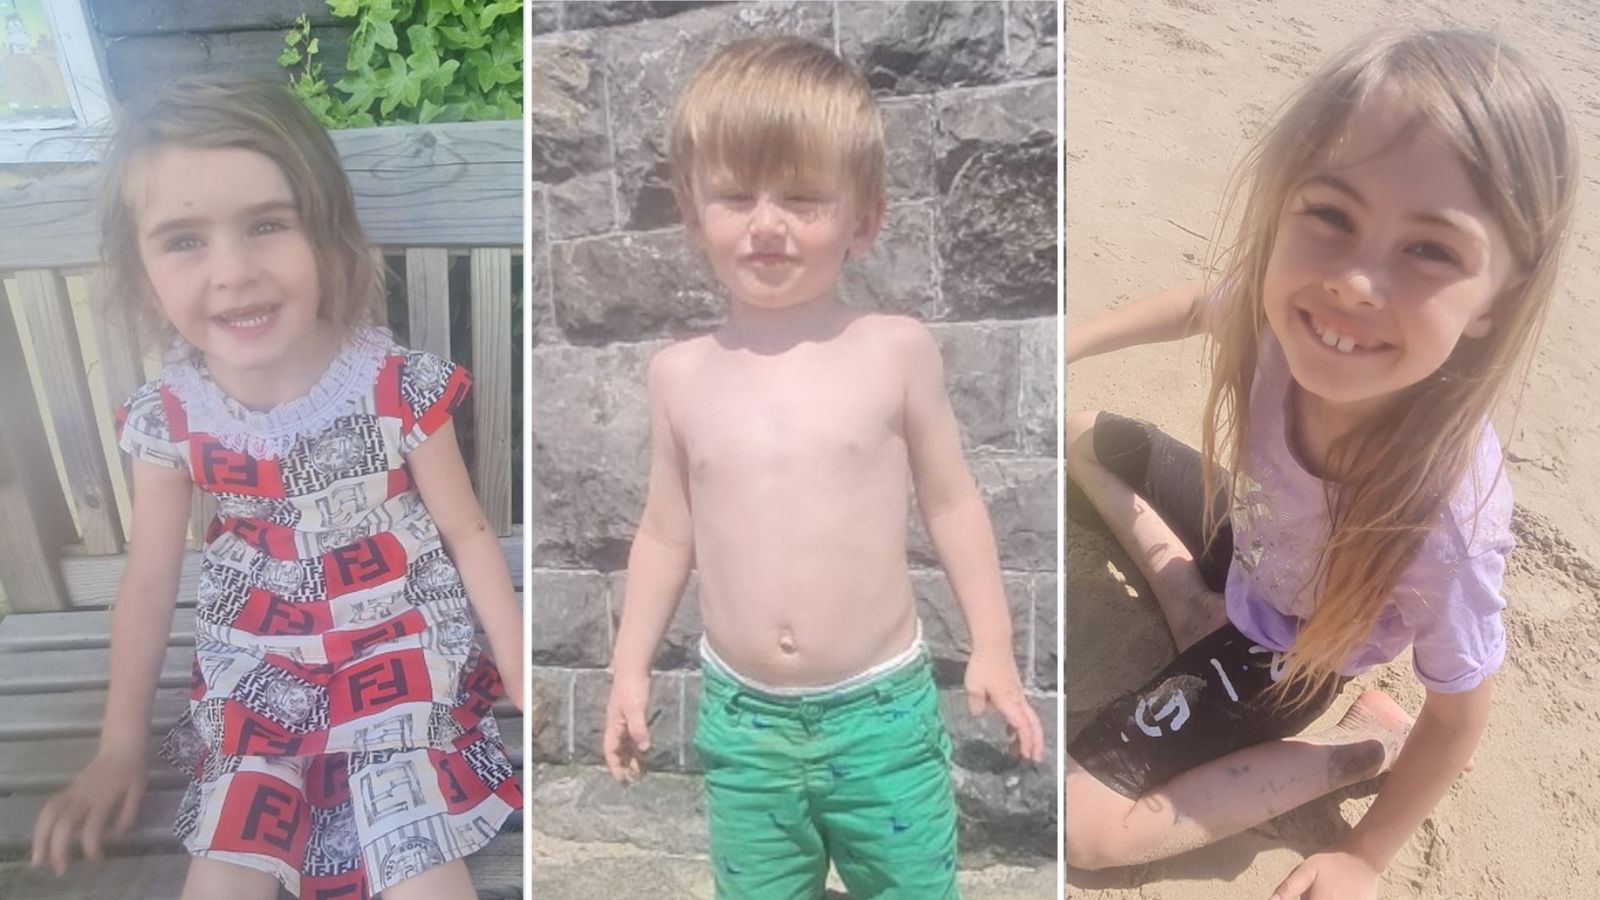 Cheltenham: Police searching for three missing children and mother